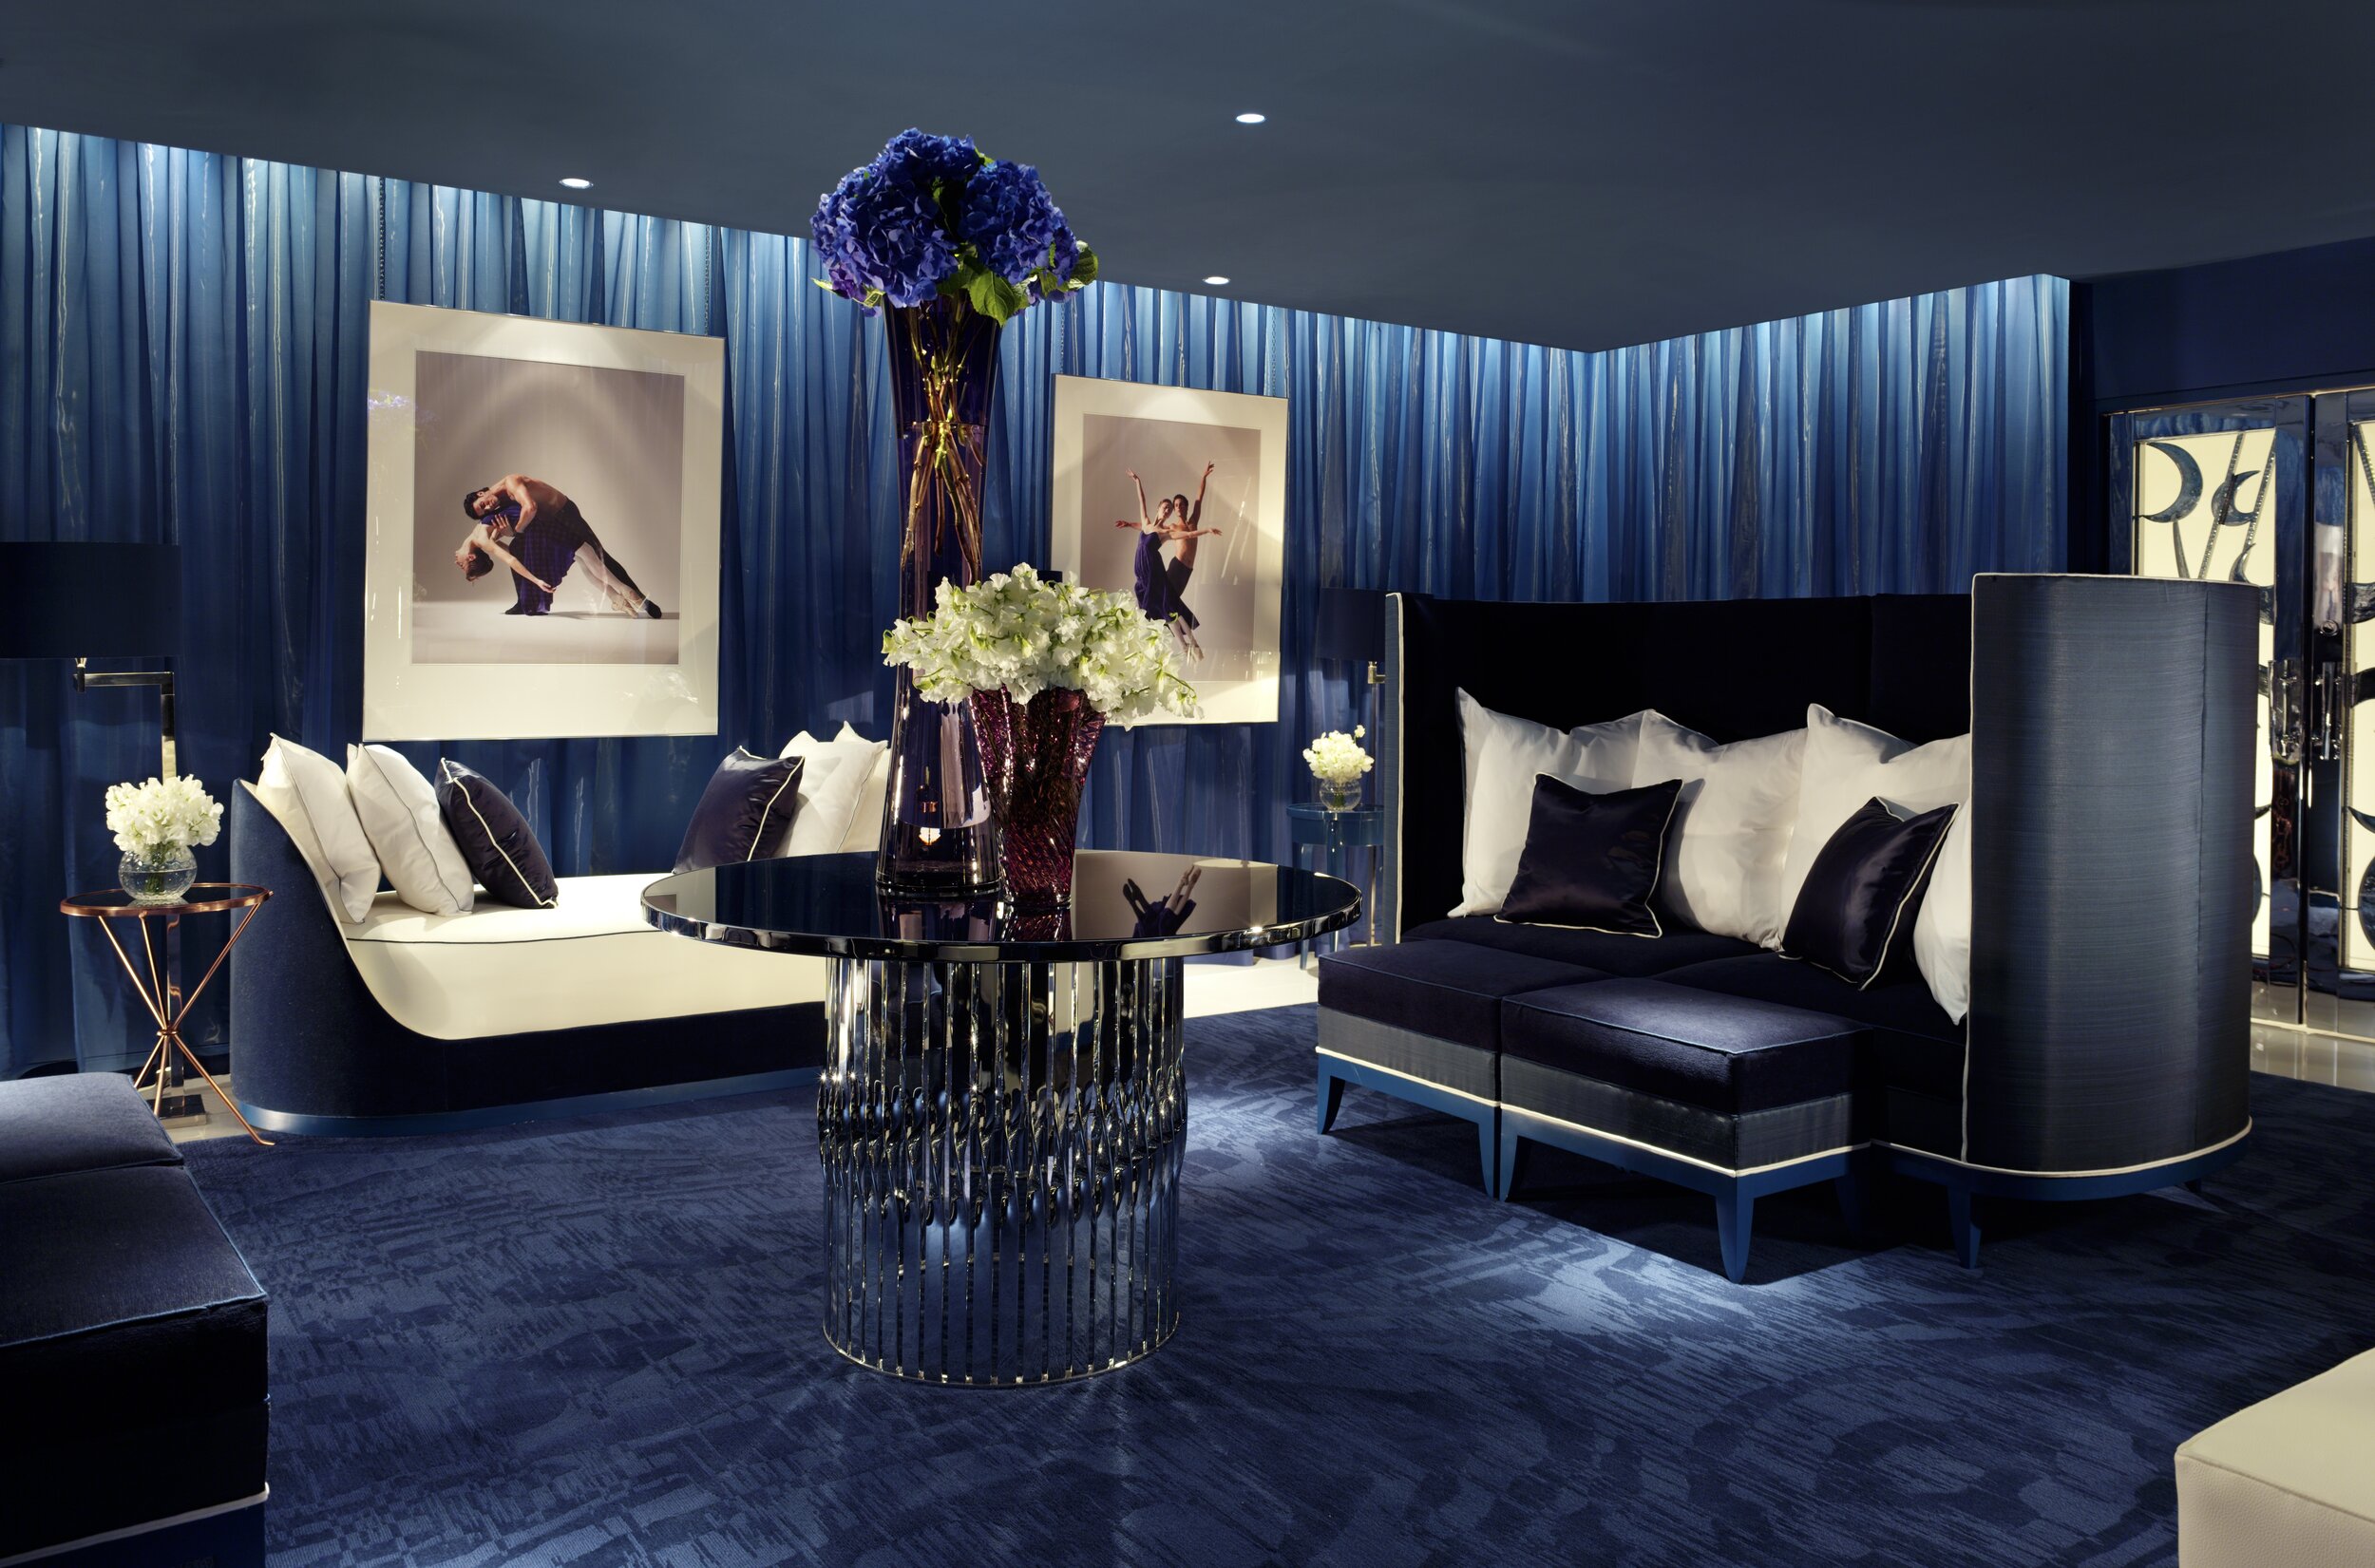 Spa - The Dorchester Spa Relaxation Room.JPG